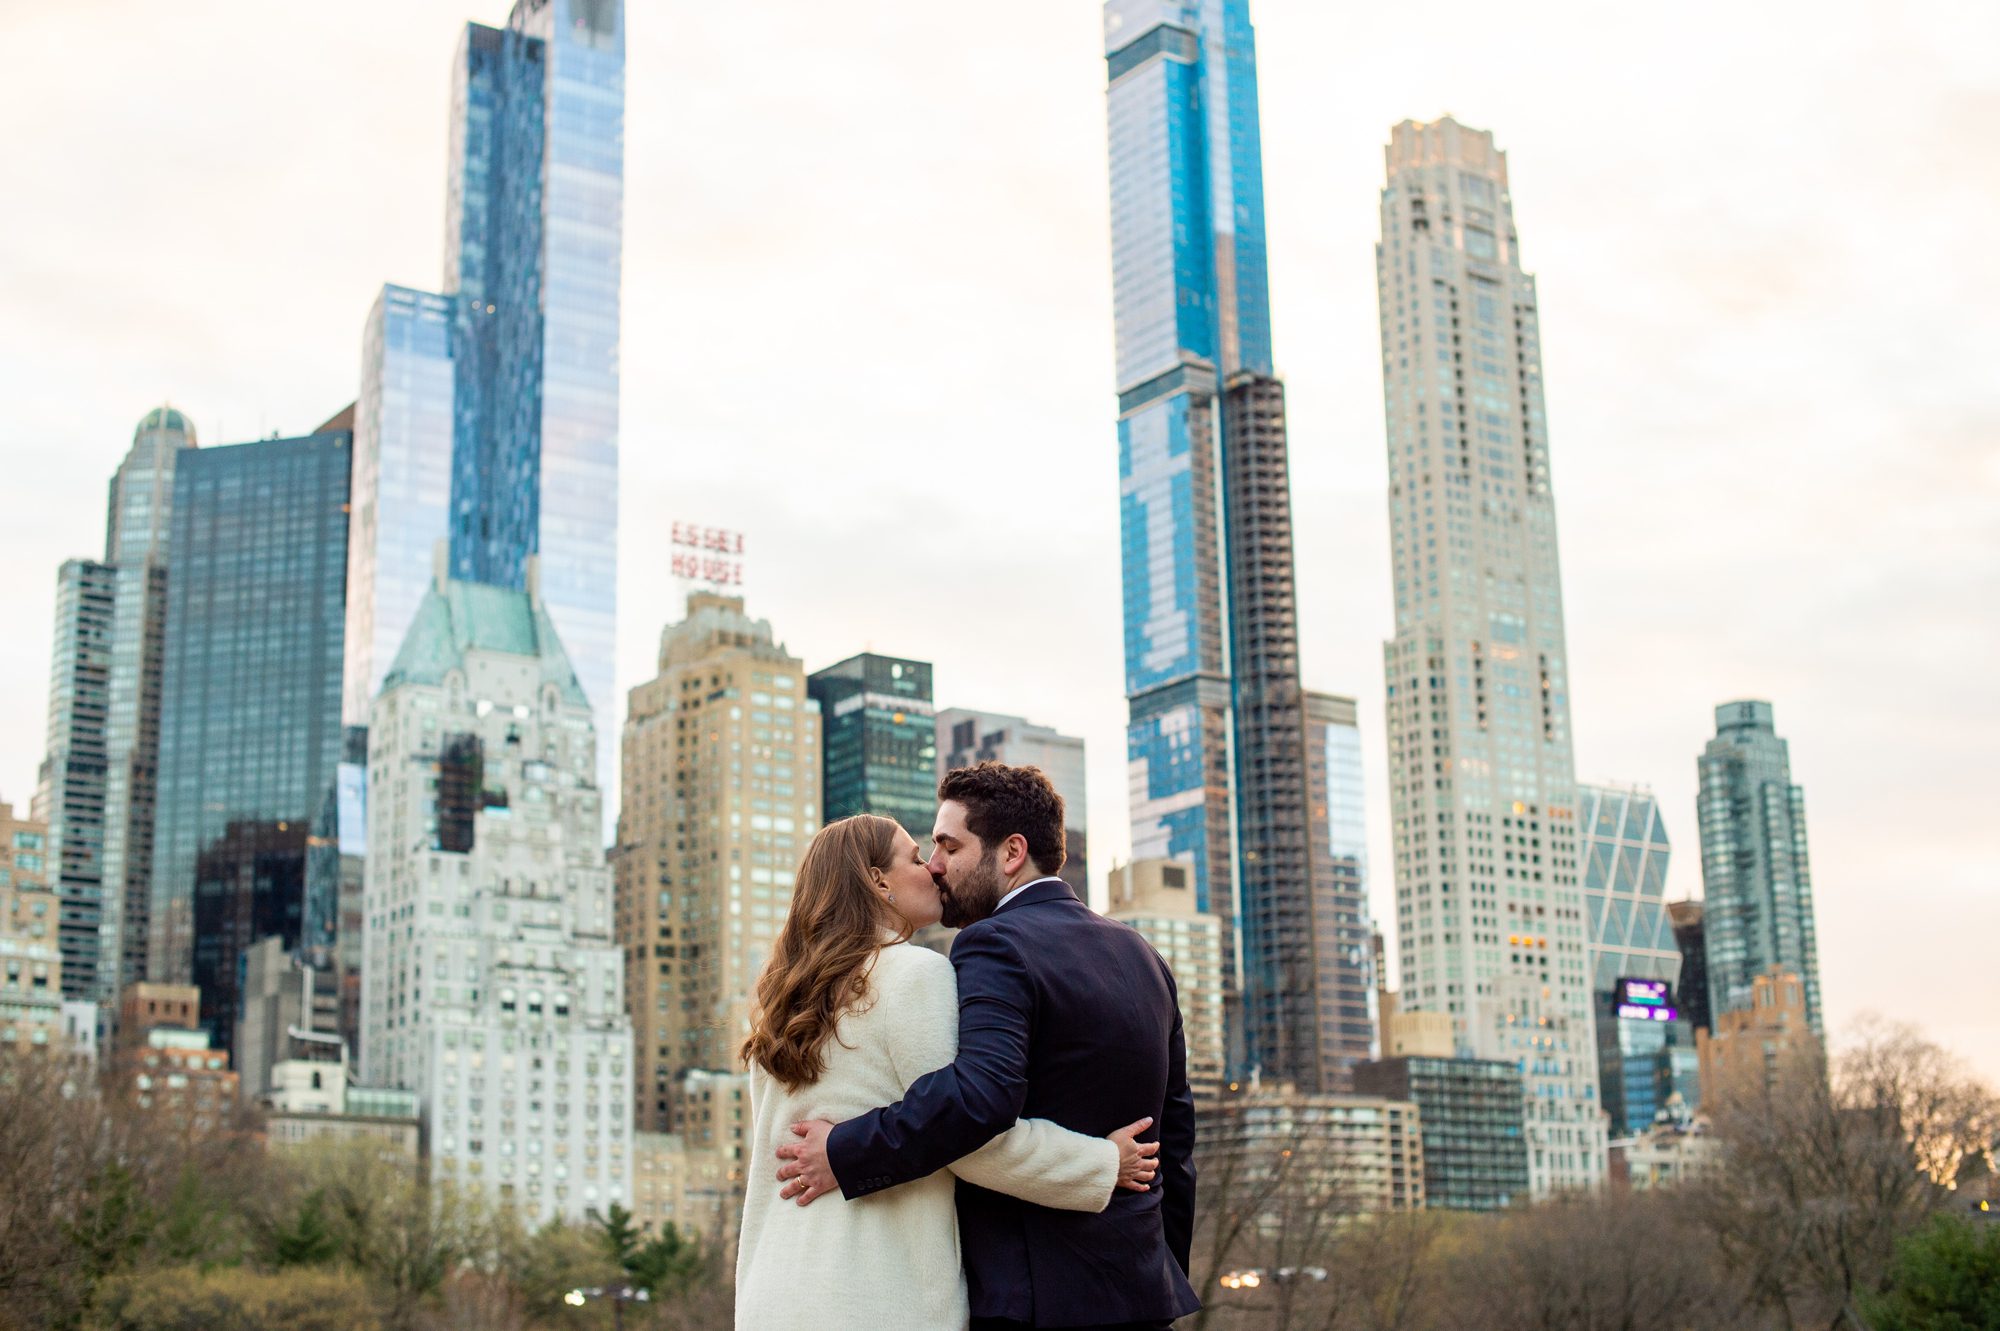 New York Elopement in Central Park 